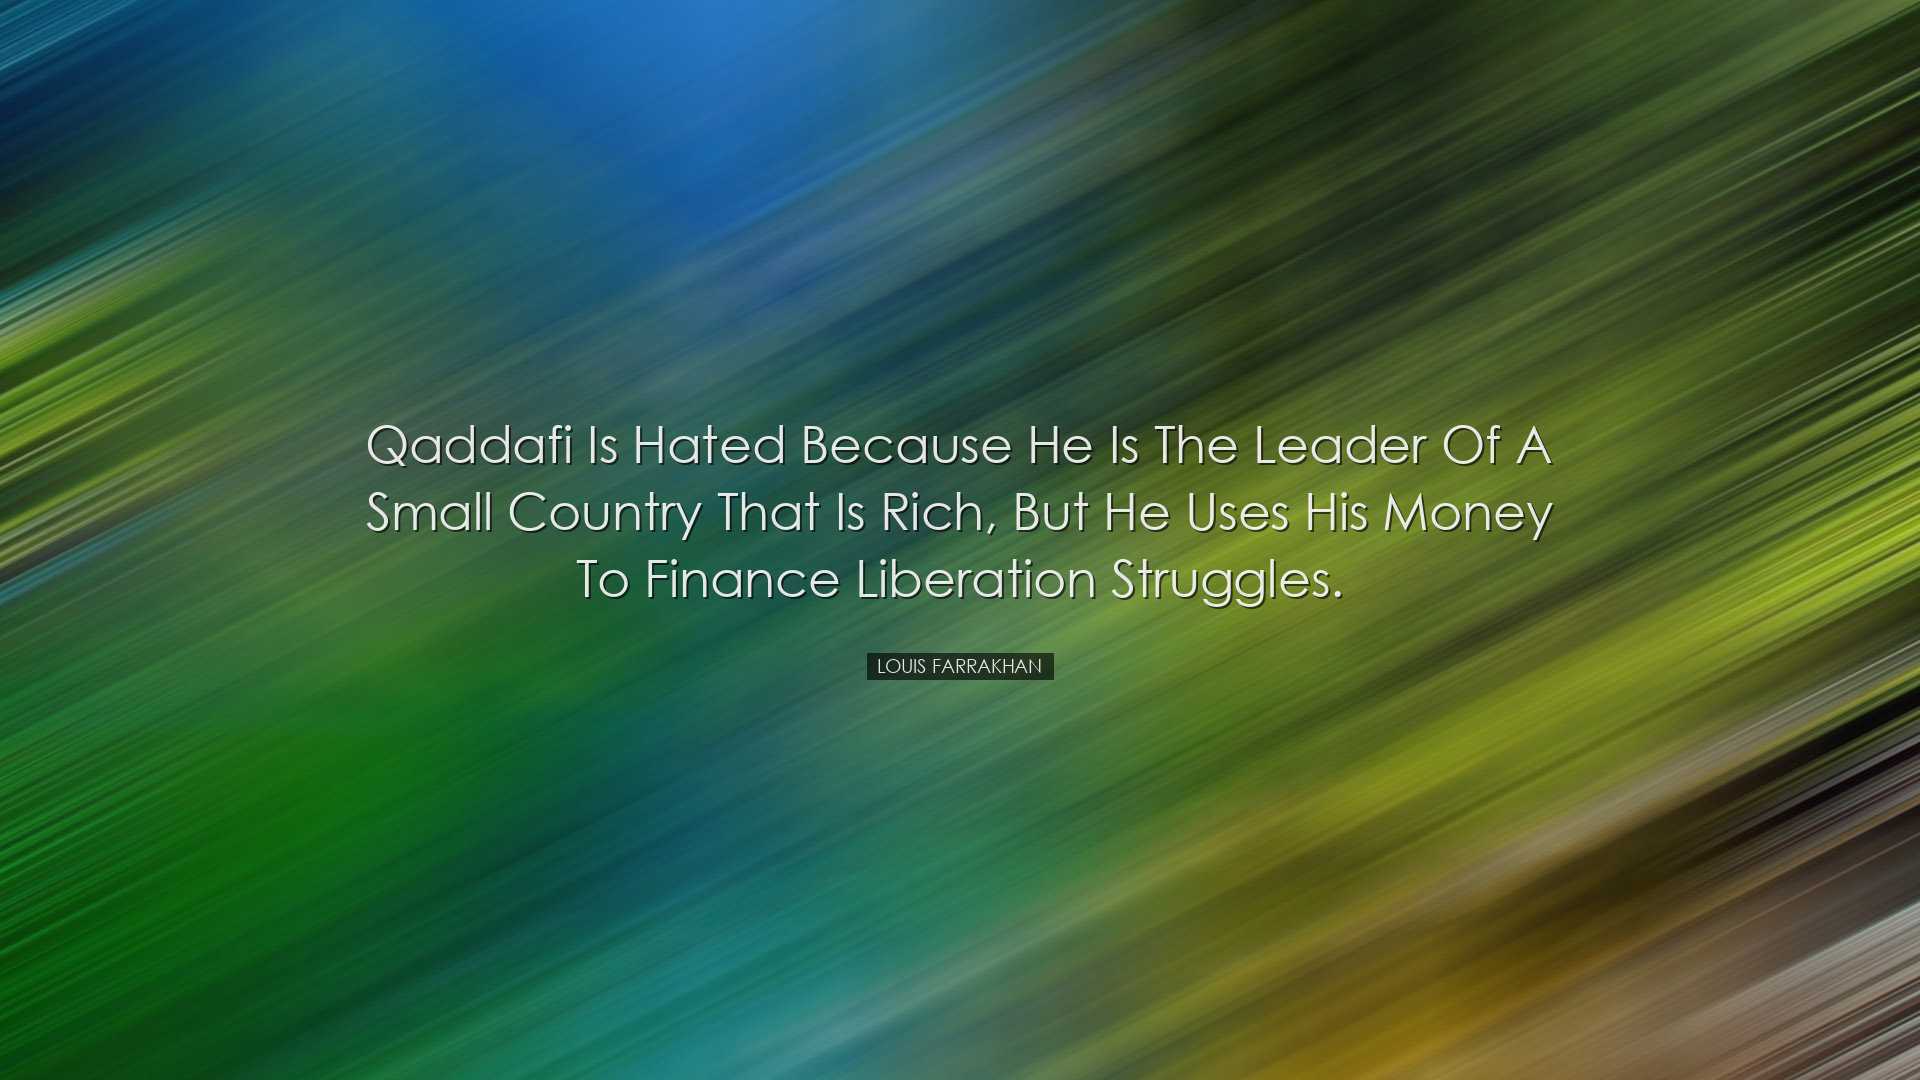 Qaddafi is hated because he is the leader of a small country that